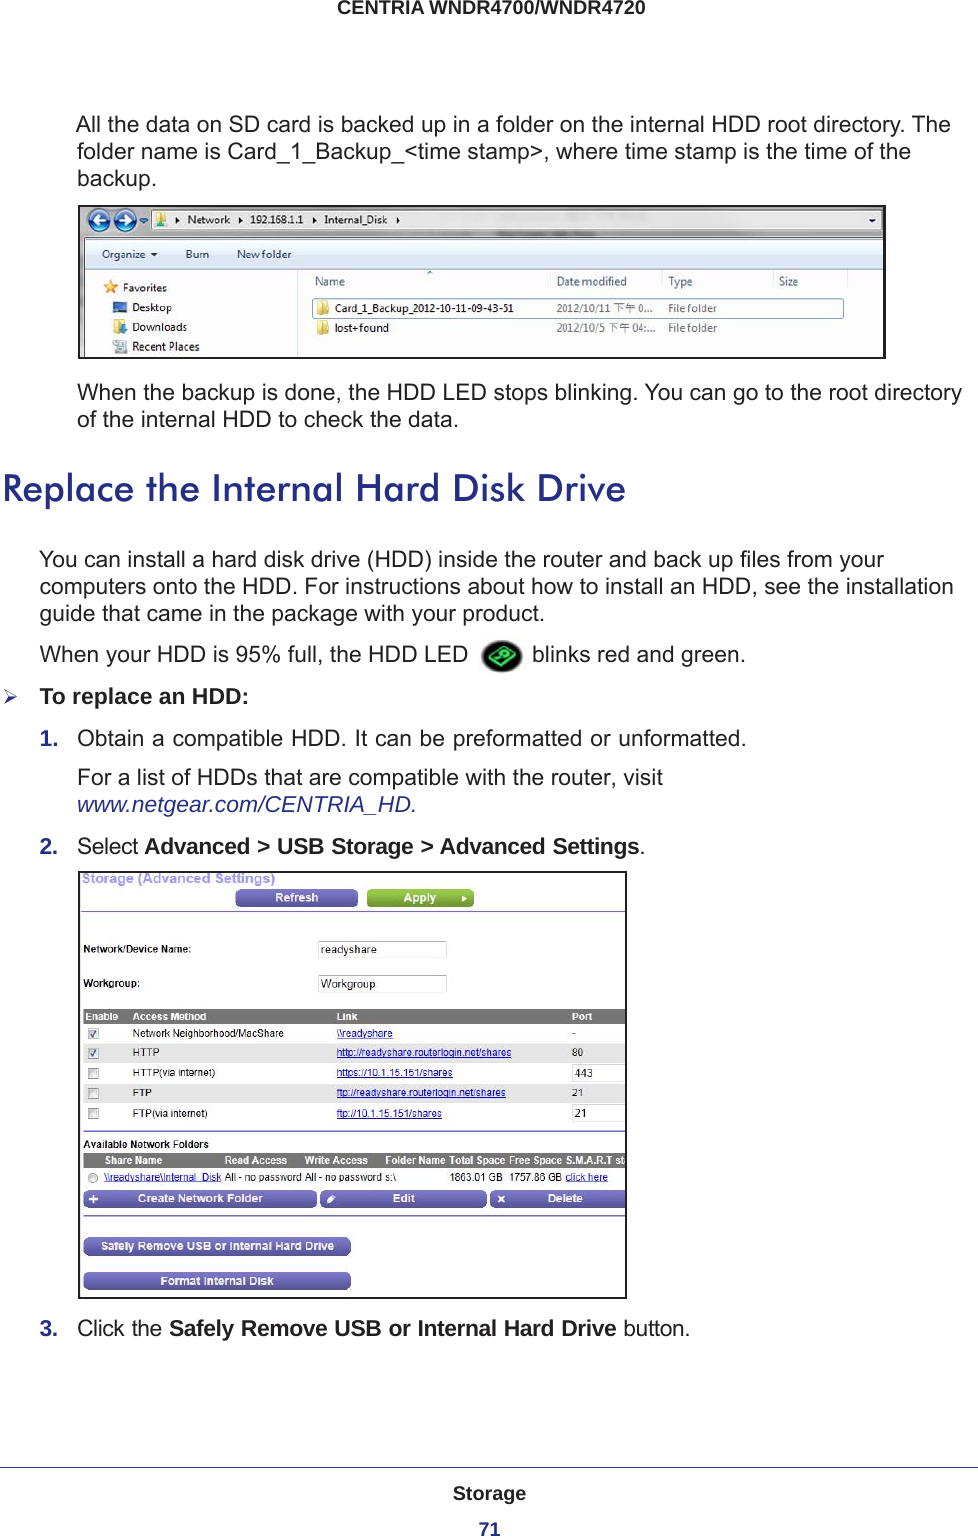 Storage71 CENTRIA WNDR4700/WNDR4720All the data on SD card is backed up in a folder on the internal HDD root directory. The folder name is Card_1_Backup_&lt;time stamp&gt;, where time stamp is the time of the backup. When the backup is done, the HDD LED stops blinking. You can go to the root directory of the internal HDD to check the data.Replace the Internal Hard Disk DriveYou can install a hard disk drive (HDD) inside the router and back up files from your computers onto the HDD. For instructions about how to install an HDD, see the installation guide that came in the package with your product.When your HDD is 95% full, the HDD LED   blinks red and green. To replace an HDD:1.  Obtain a compatible HDD. It can be preformatted or unformatted.For a list of HDDs that are compatible with the router, visit www.netgear.com/CENTRIA_HD.2.  Select Advanced &gt; USB Storage &gt; Advanced Settings.3.  Click the Safely Remove USB or Internal Hard Drive button.